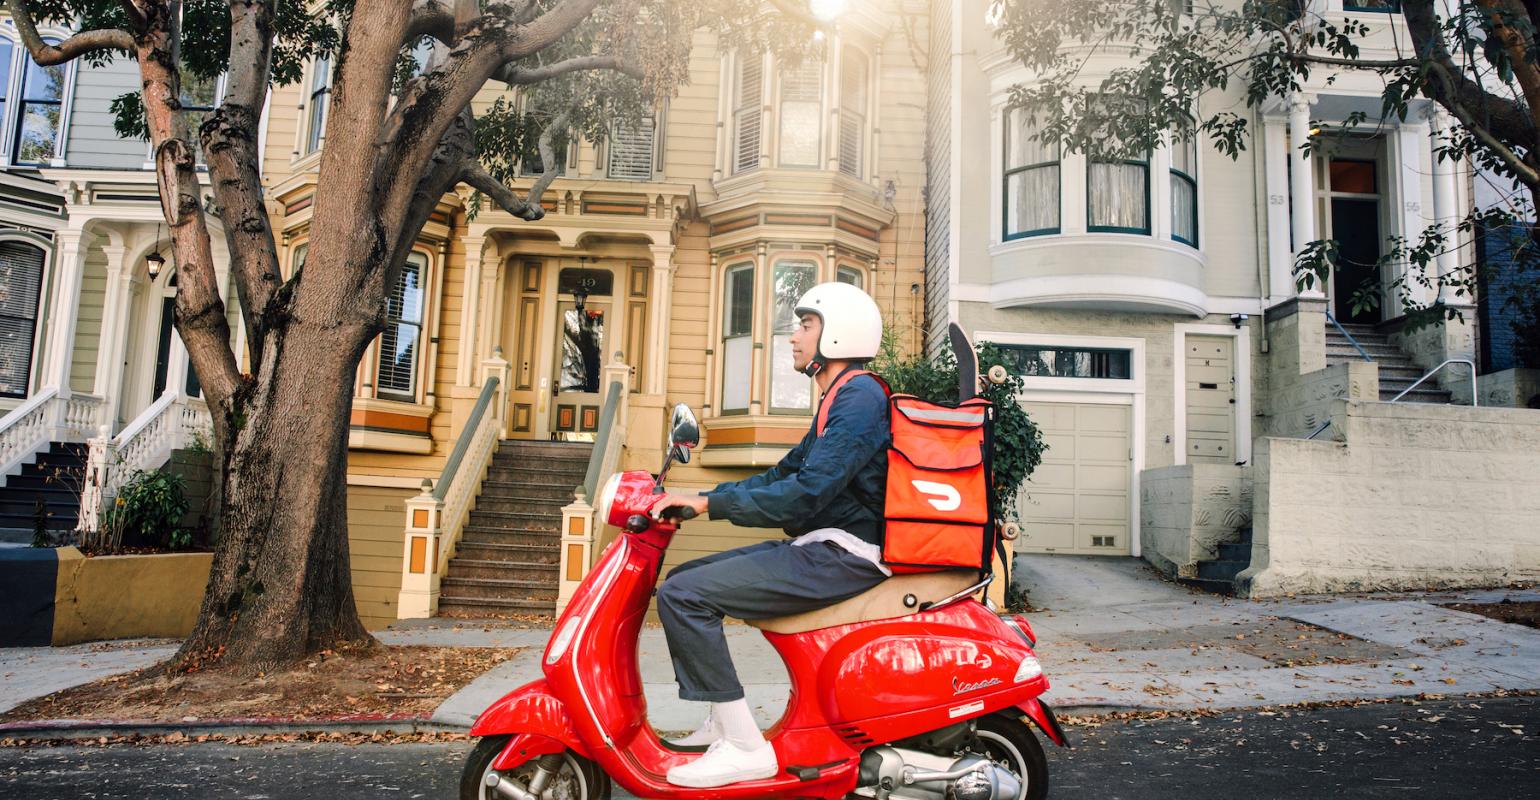 New DoorDash pricing tiers offer commission rates starting at 15%